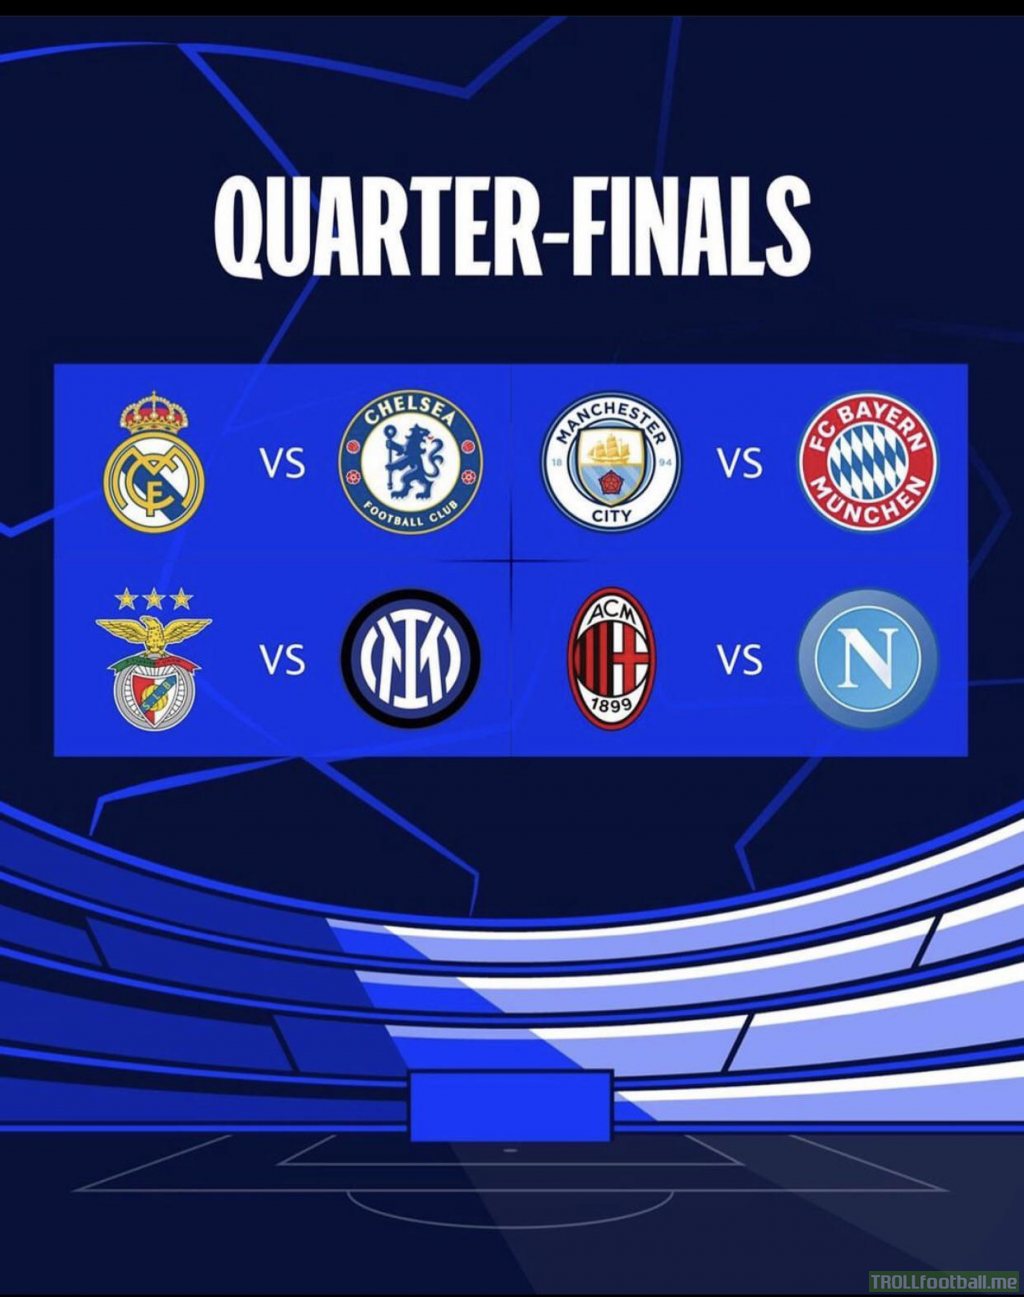 Not long now…Who will win their first leg?